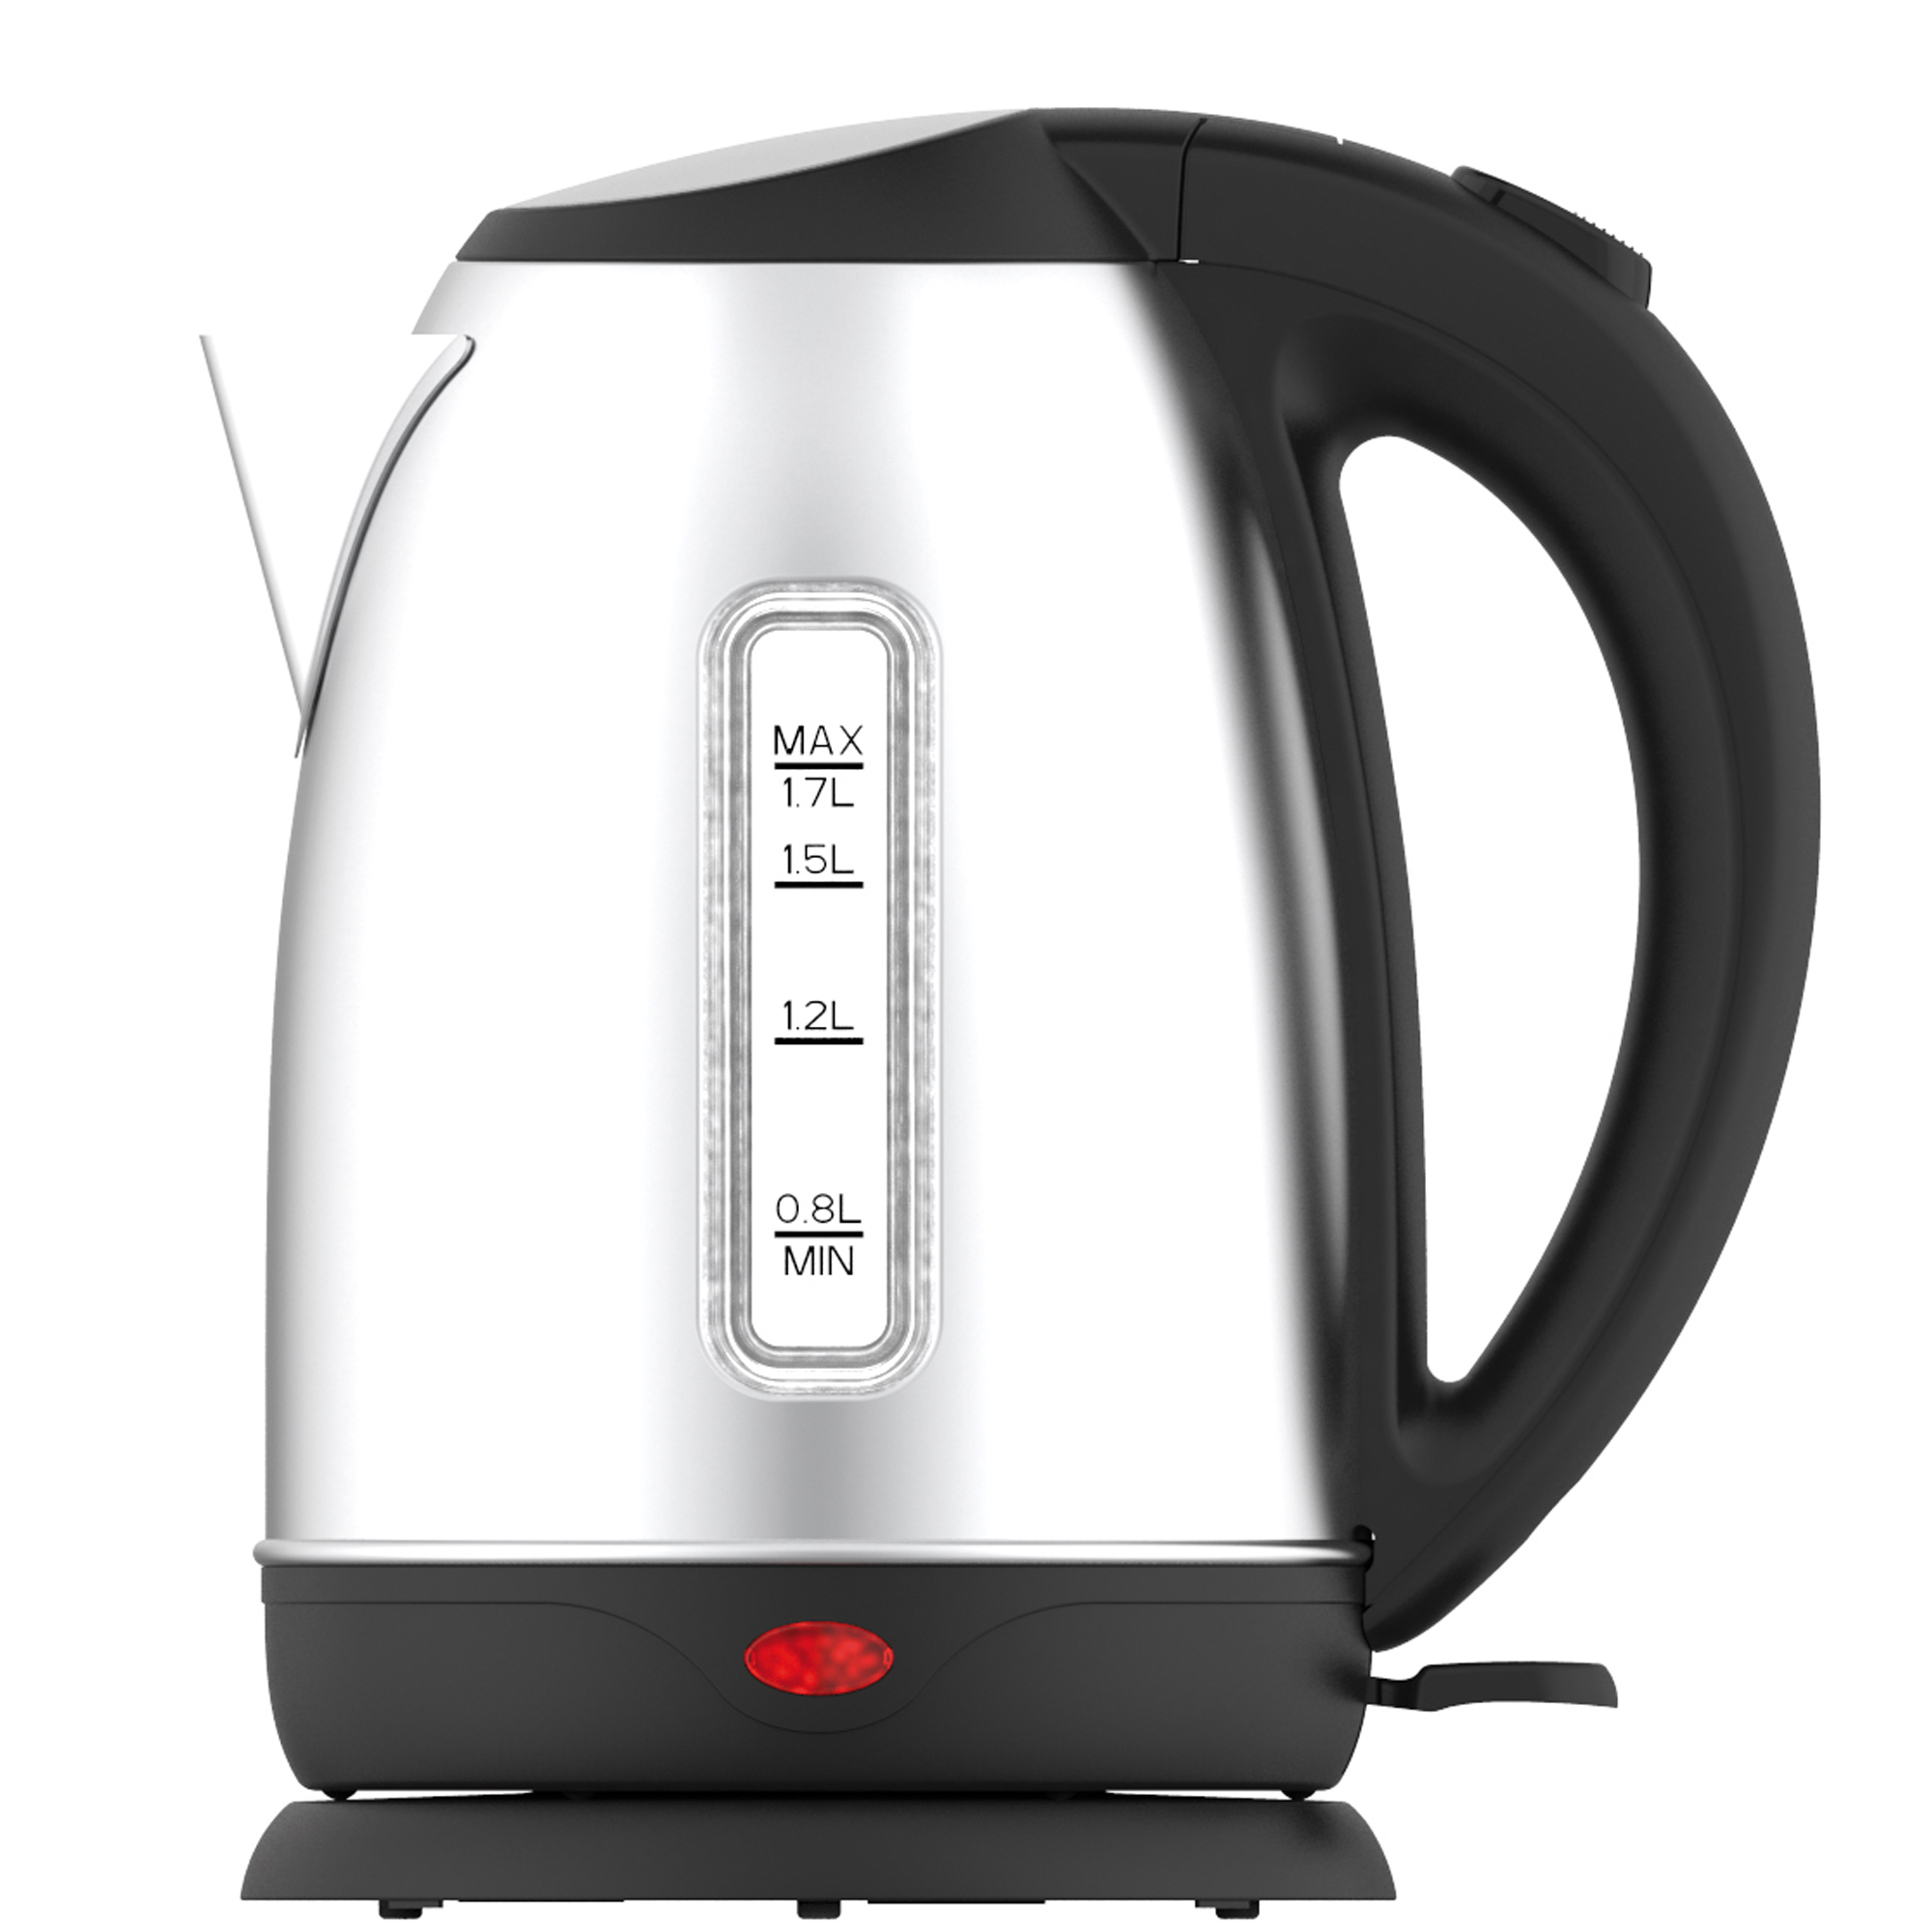 Daewoo SYM-1335: Stainless Steel Cordless Electric Kettle